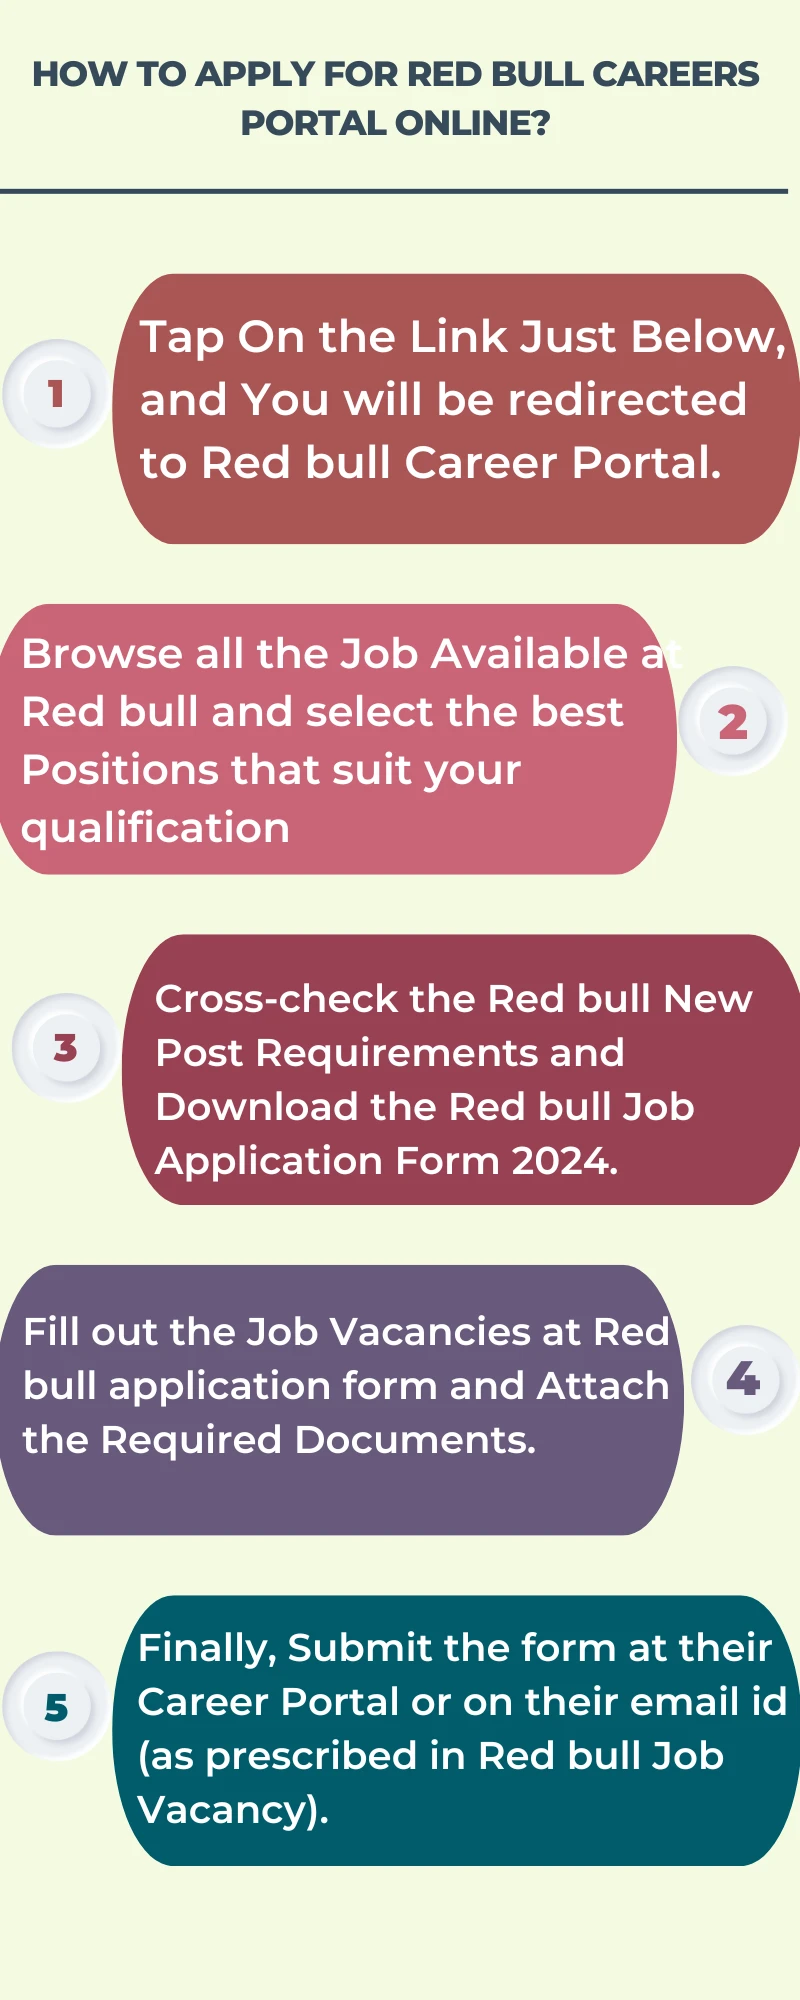 How To Apply for Red bull Careers Portal Online?